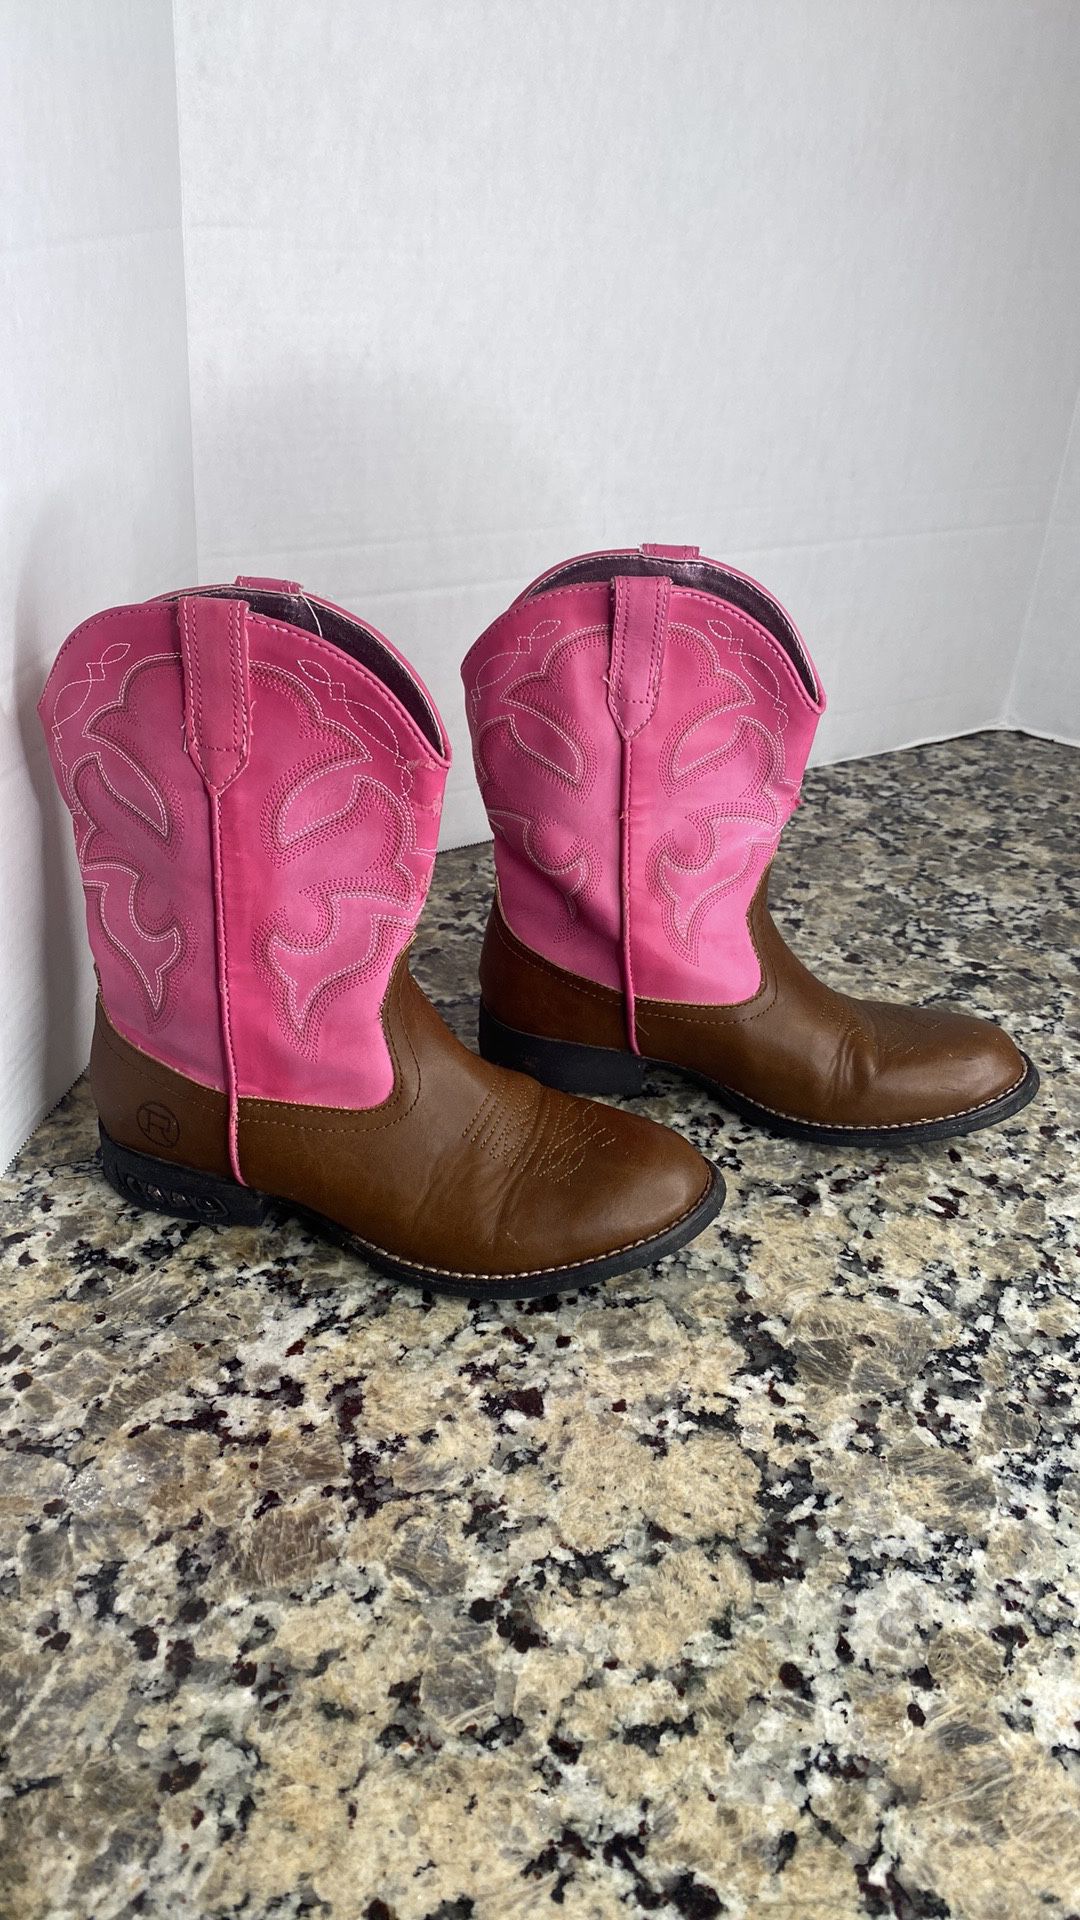 Girls Pink Roper light up boots Girls 2 cowgirl western equestrian